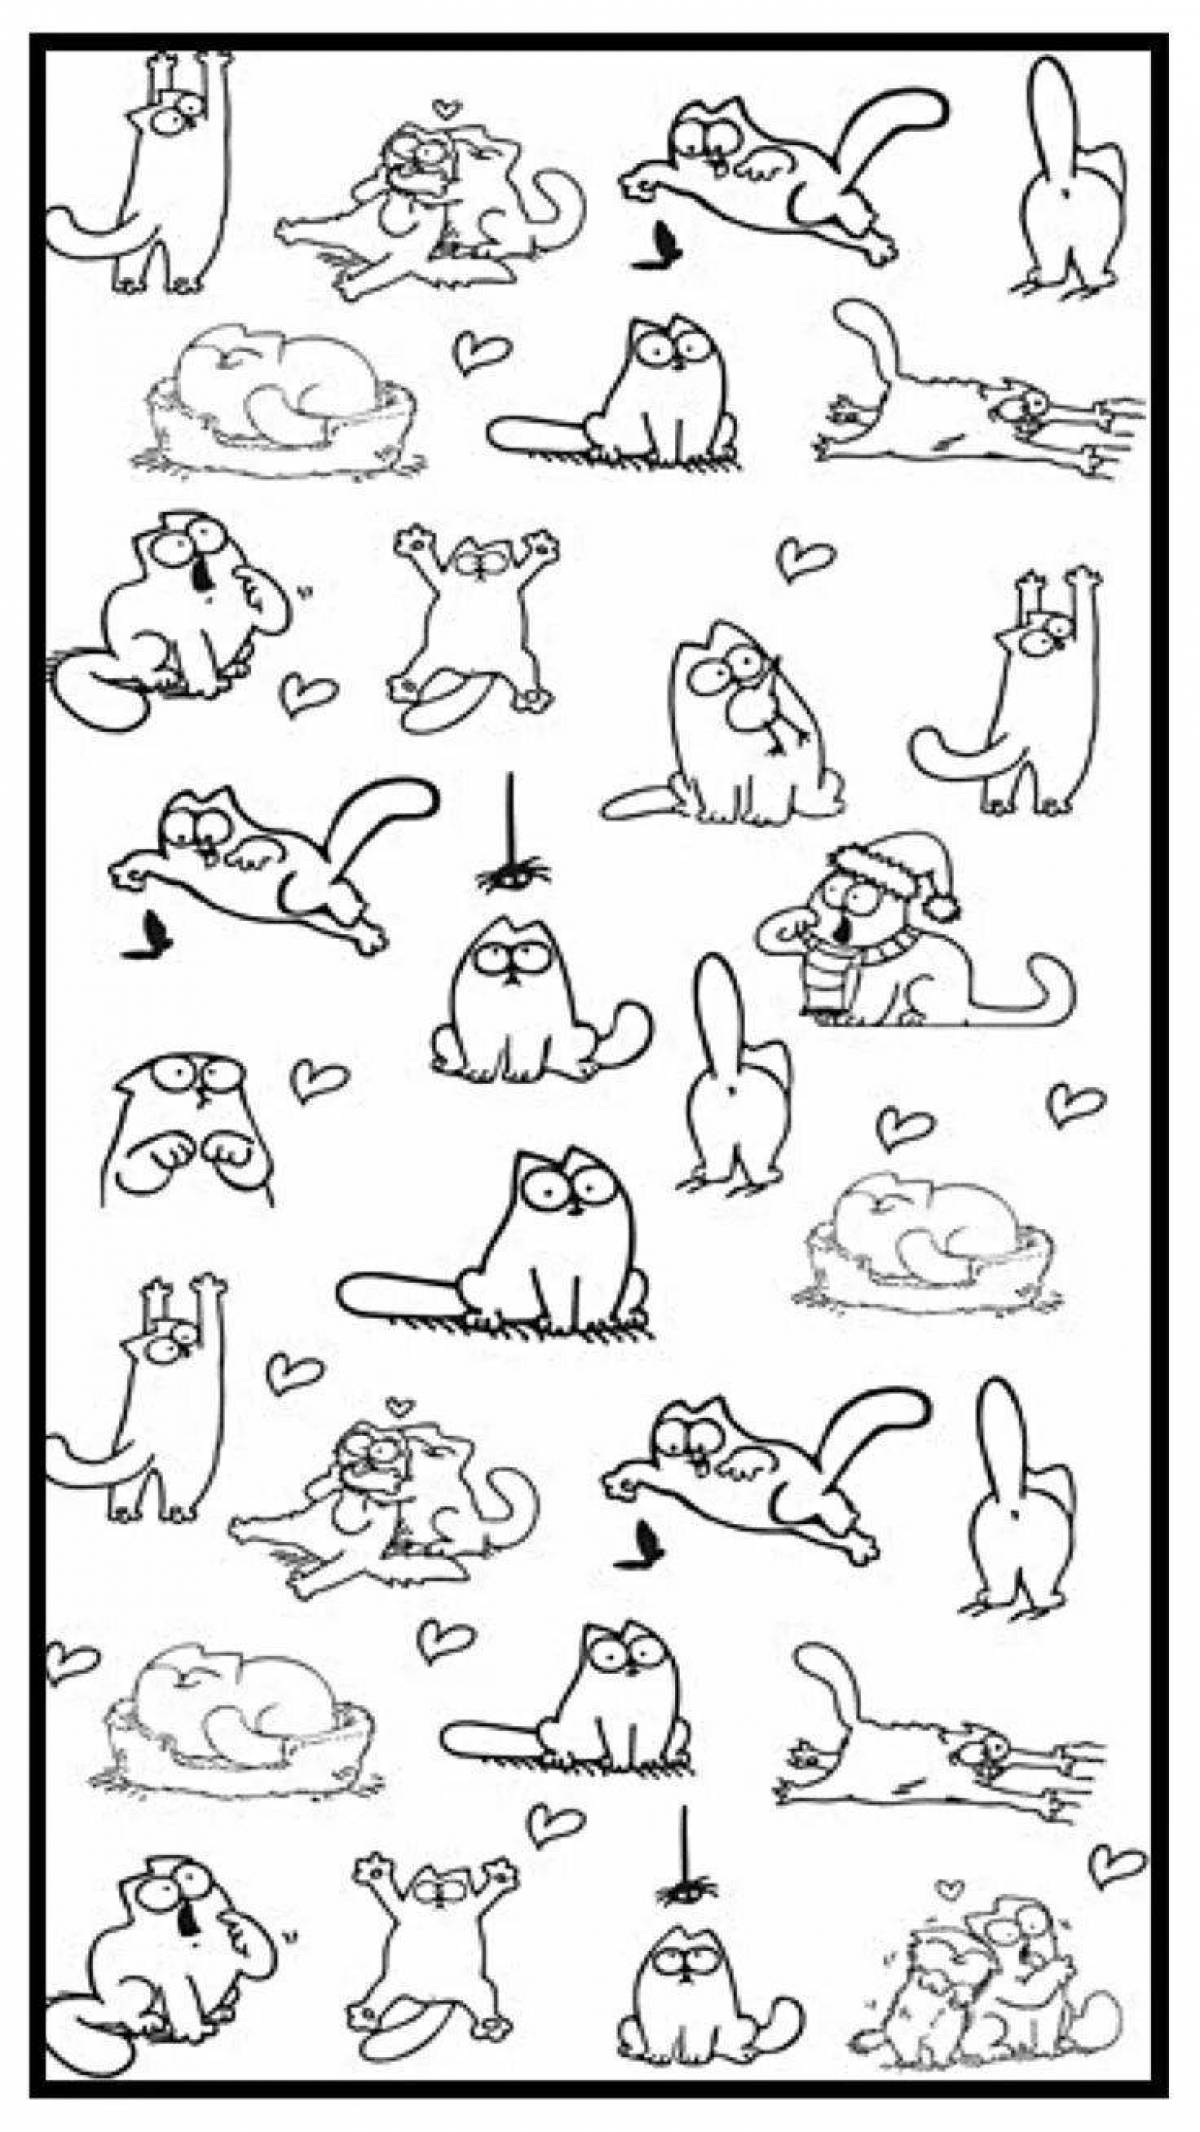 Live coloring small cats for stickers